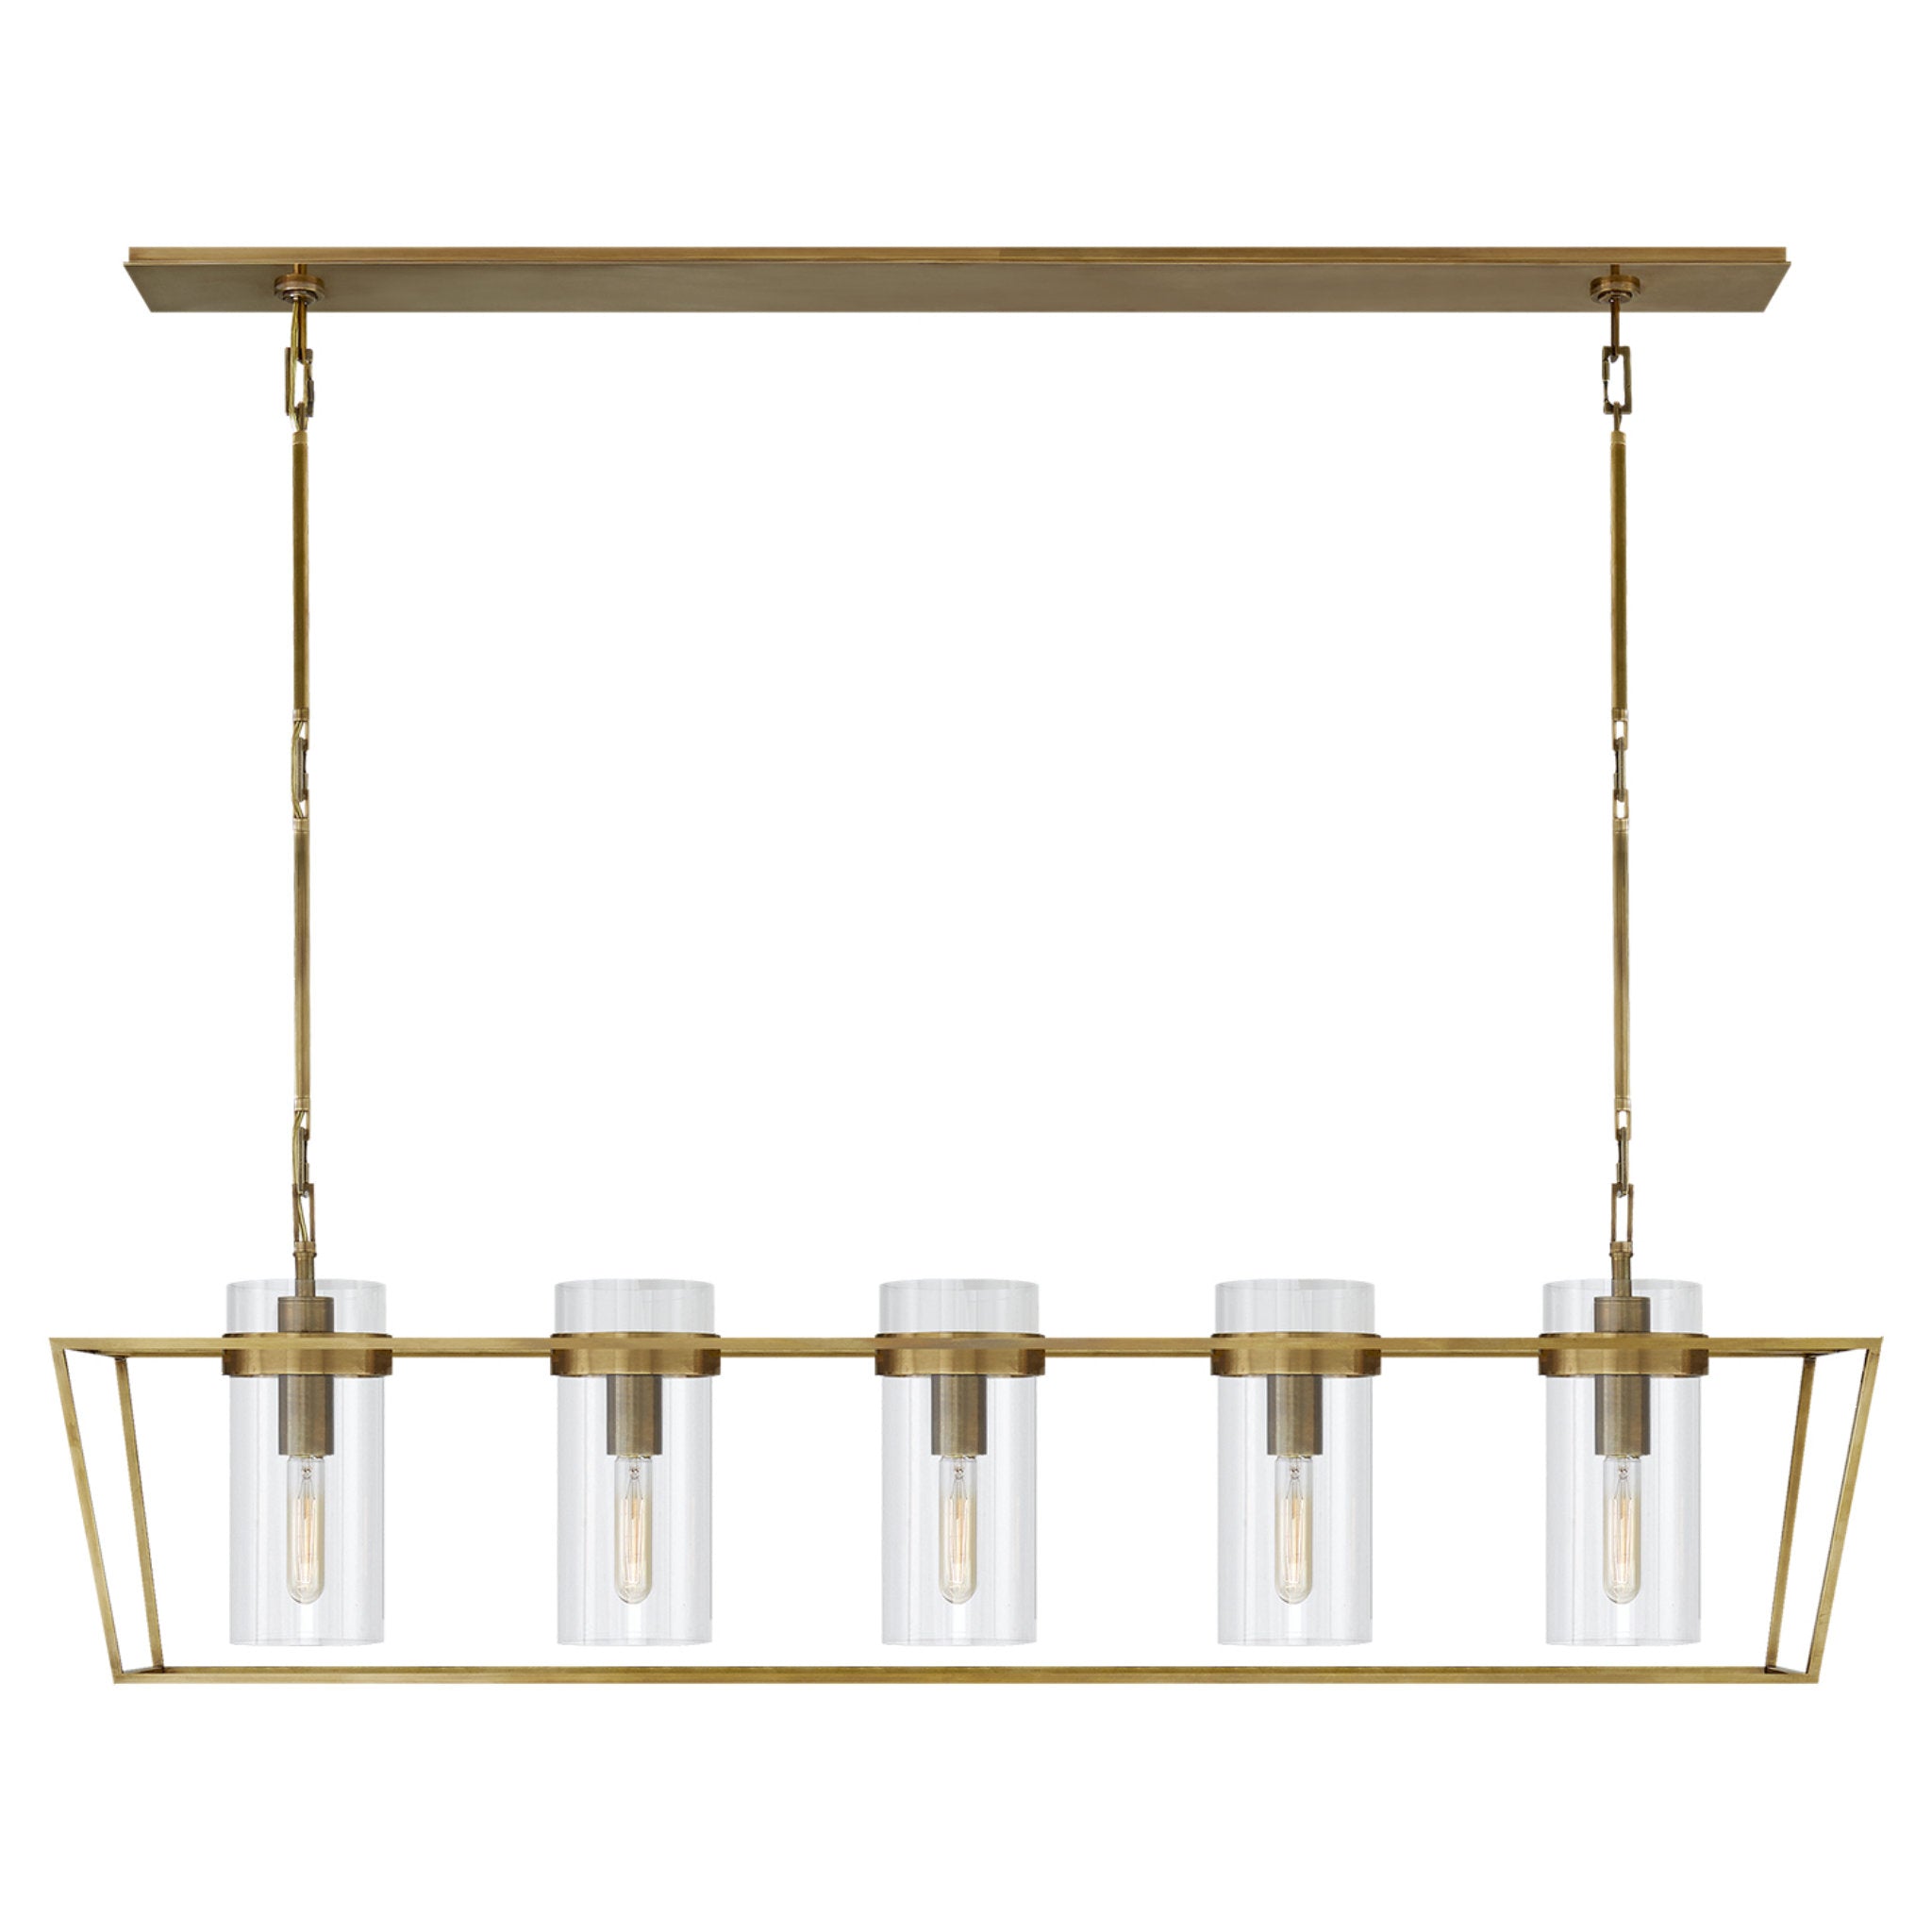 Ian K. Fowler Presidio Large Linear Lantern in Hand-Rubbed Antique Brass with Clear Glass